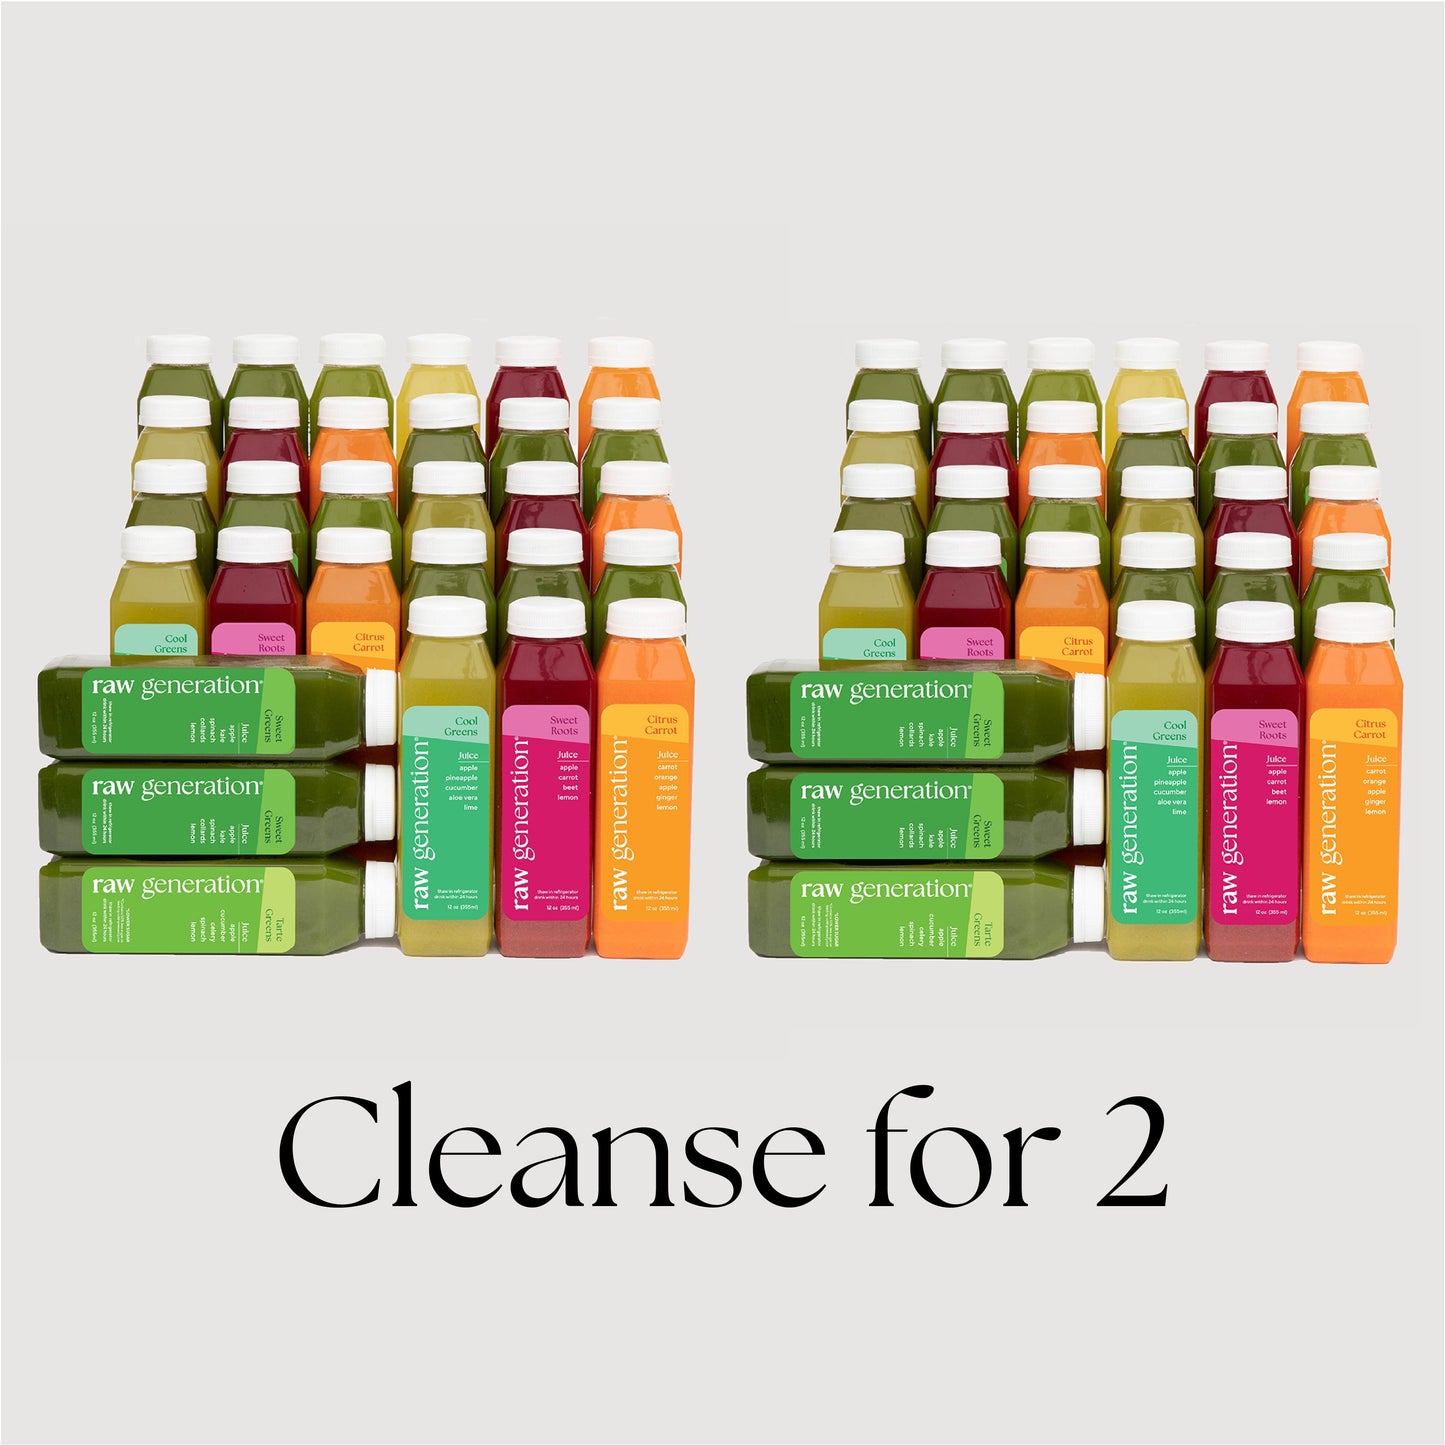 Cleanse for 2